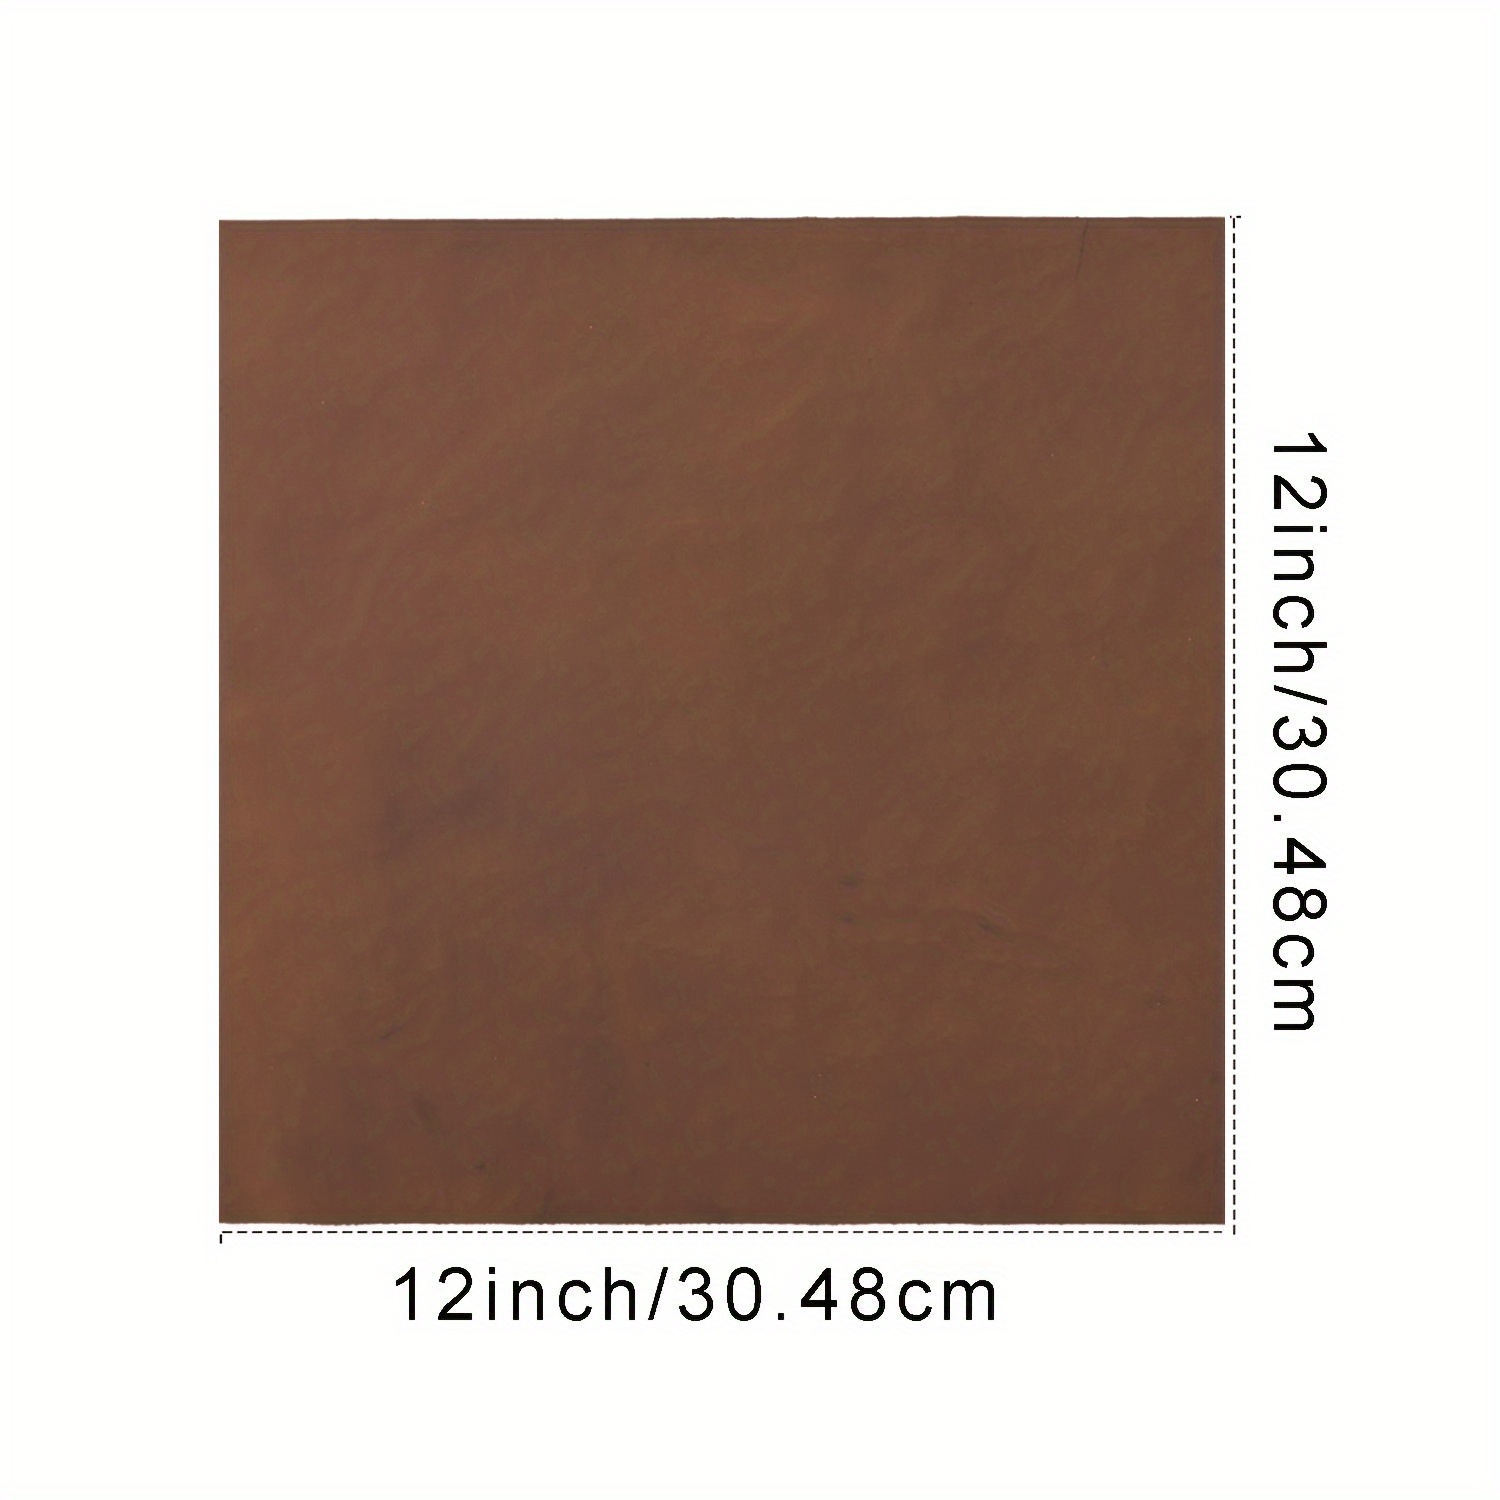 ANT MAKERS Thick Leather Sheets for Crafts Tooling Leather Square 1.8-2.0mm  Full Grain Leather Pieces Genuine Cowhide Leather for Crafts Sewing Hobby